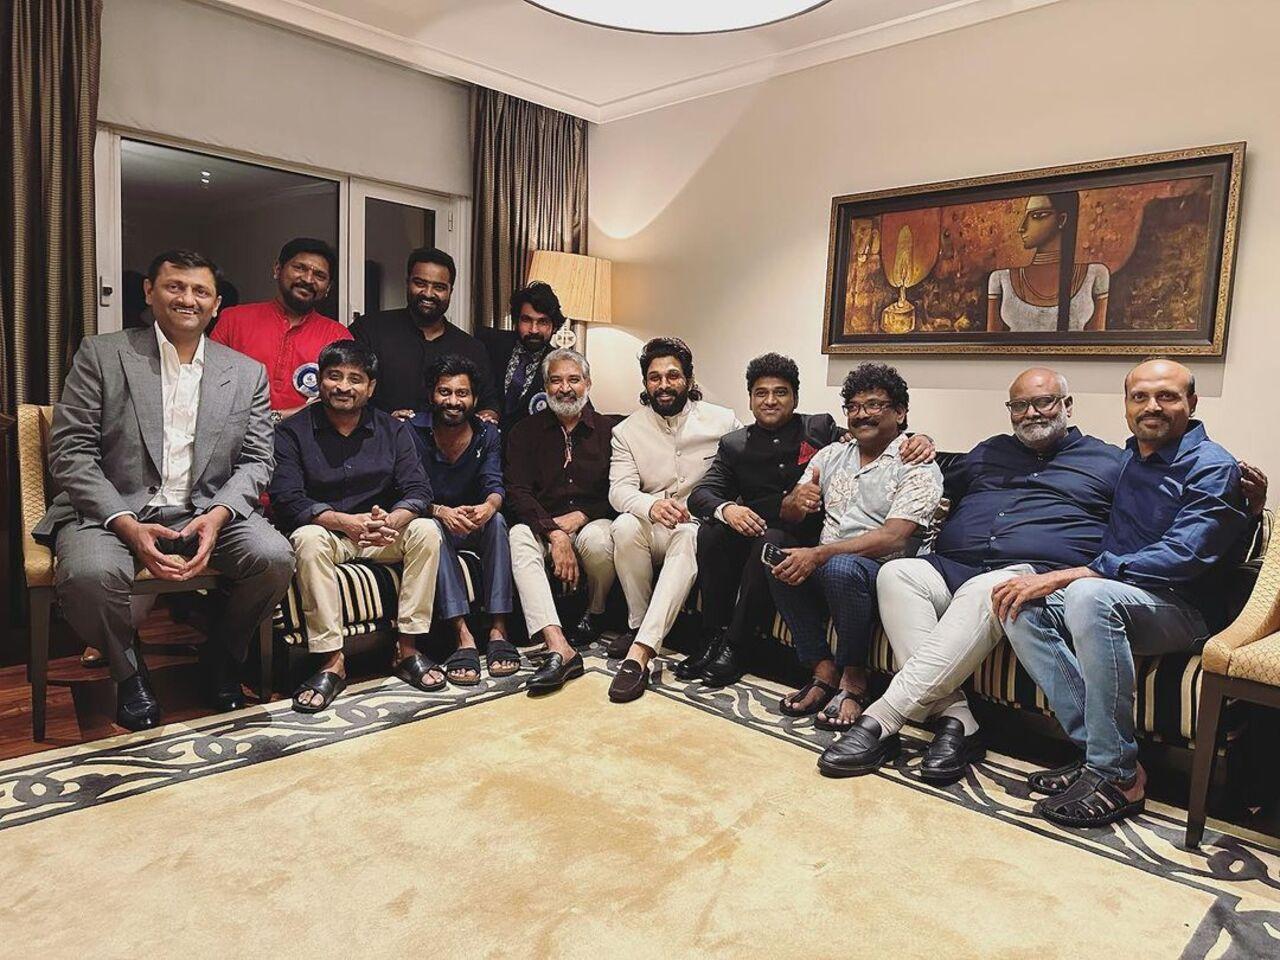 Several members of the Telugu industry, who won the National Award, came together for a lovely picture